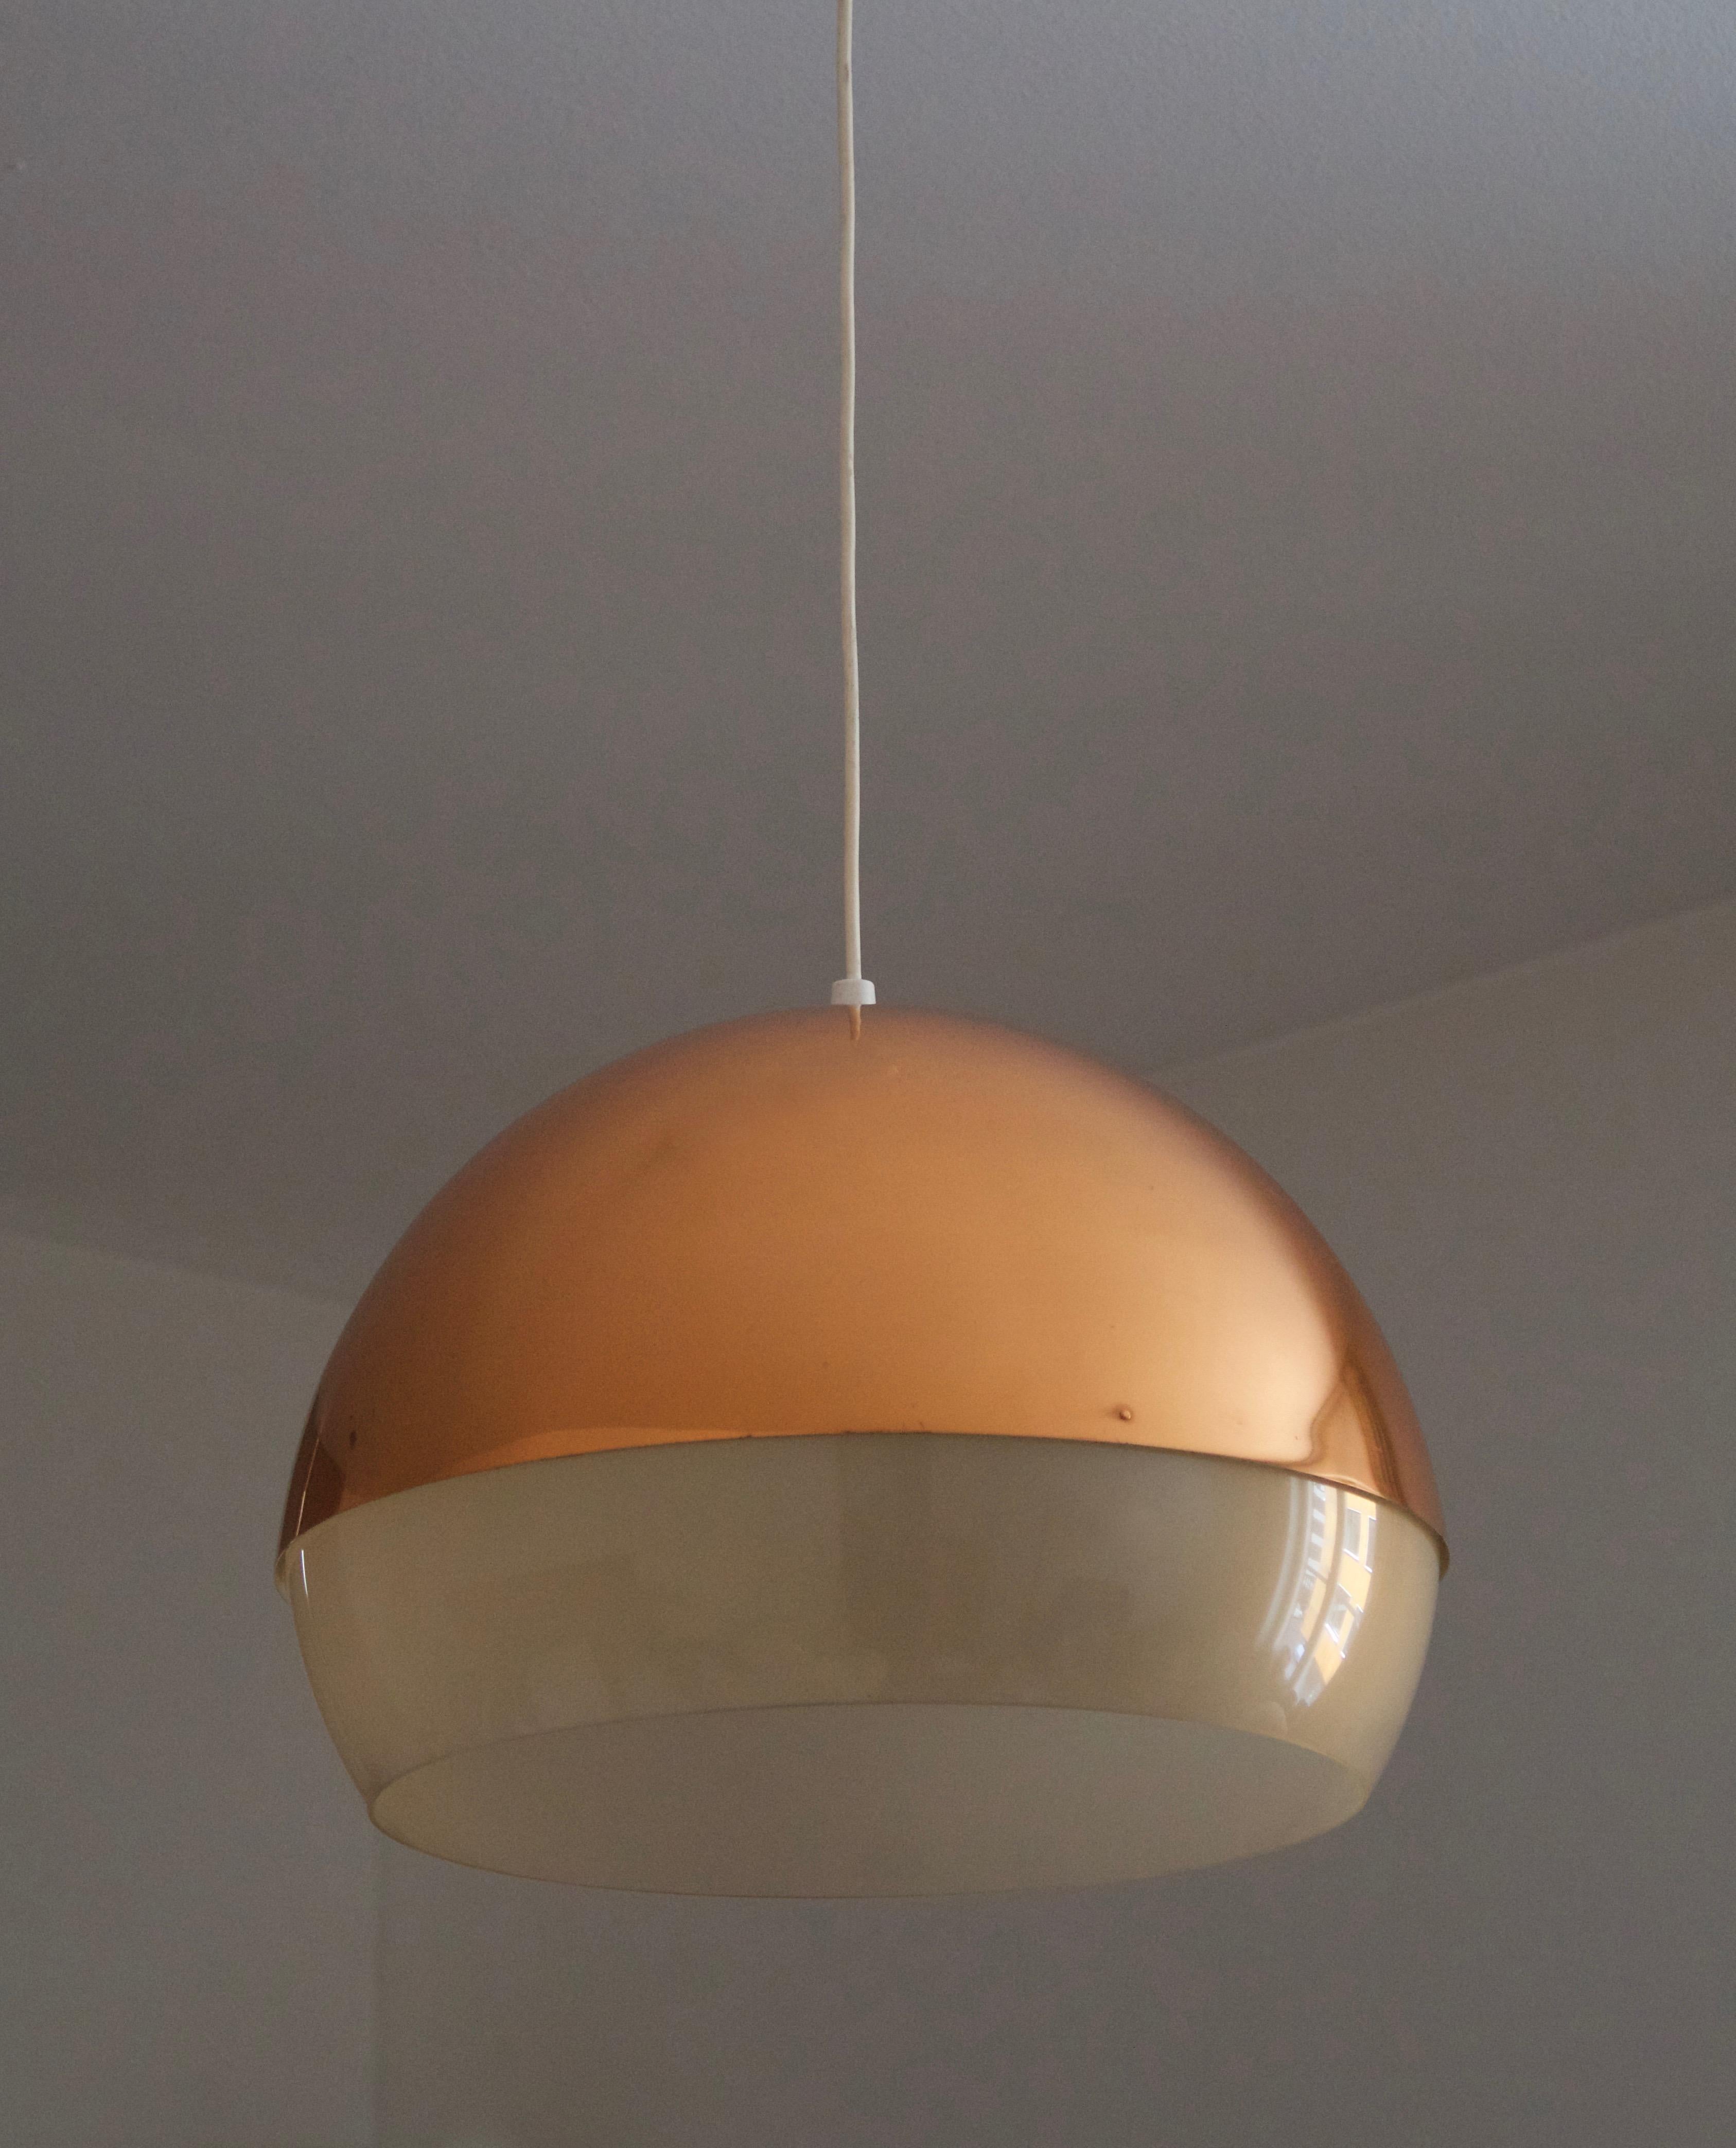 A pendant light, designed by Yki Nummi (Finnish, 1925-1984). Produced by Orno, c. 1950s-1960s.

